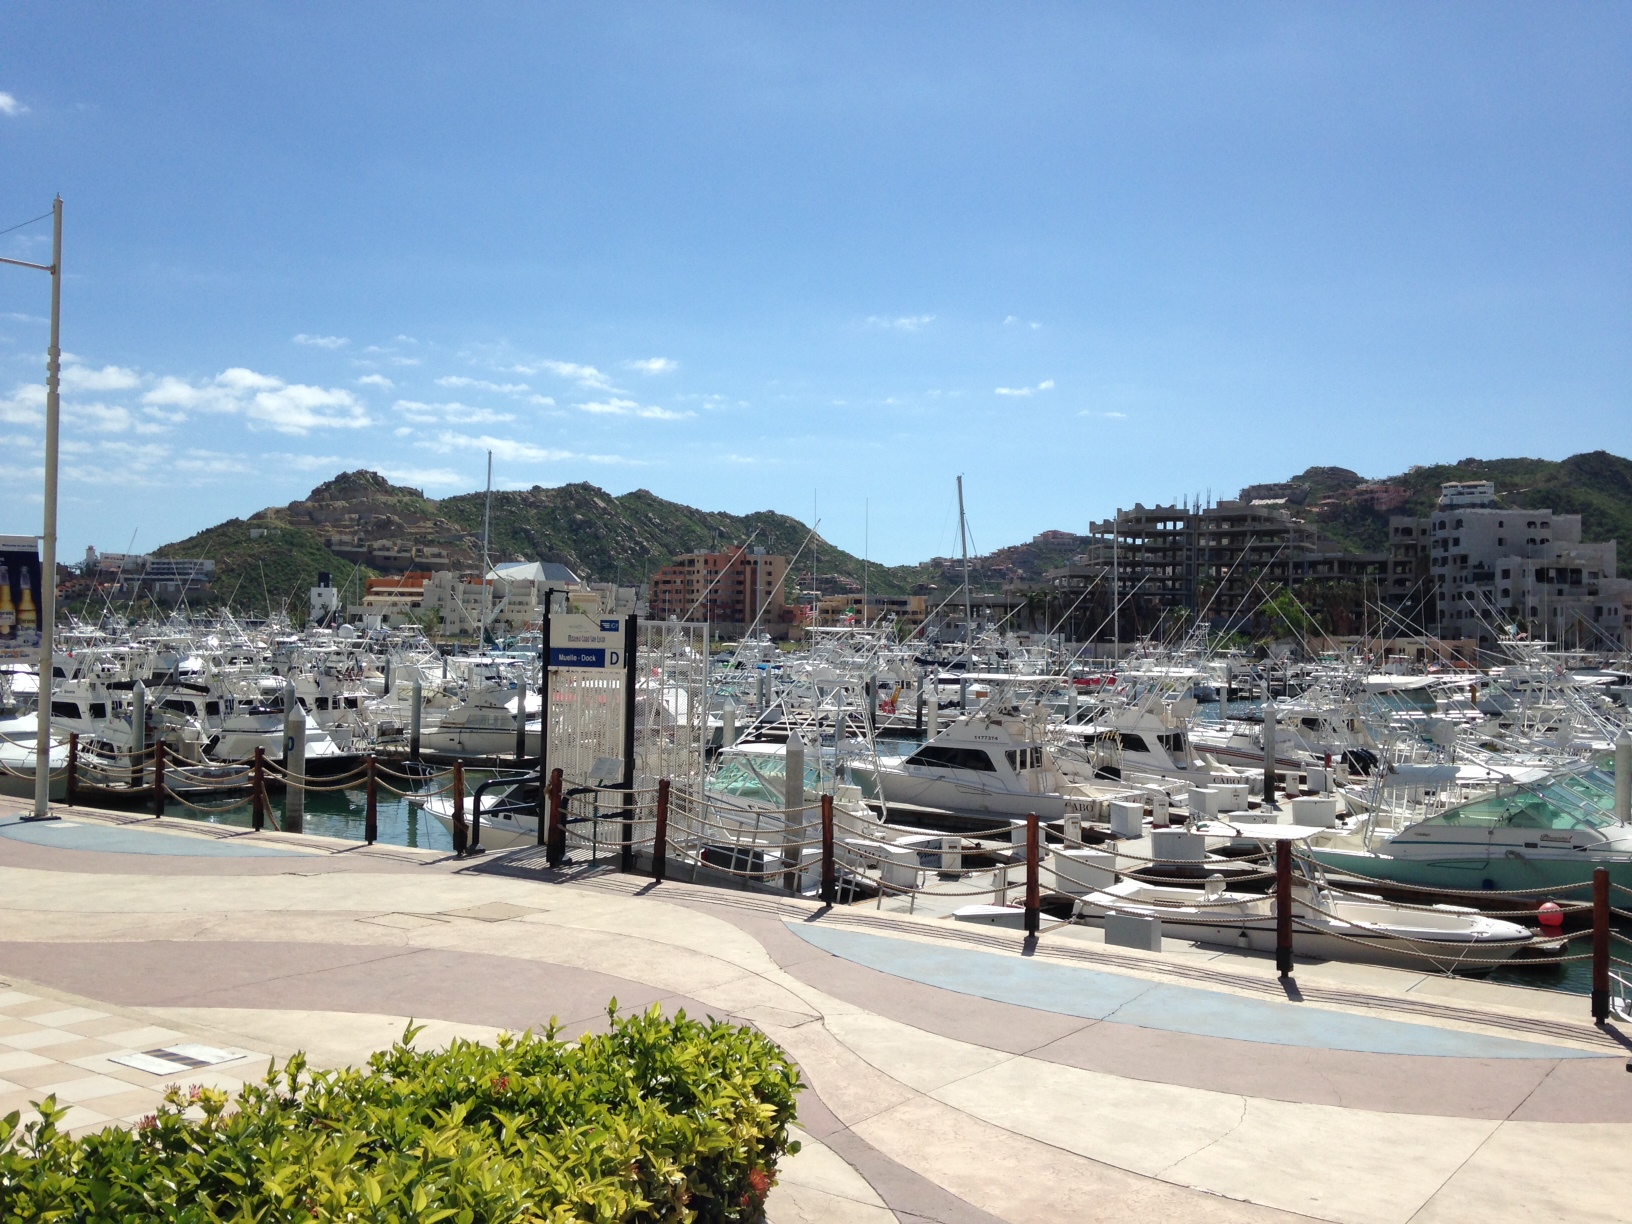 Cabo marina ready for tournament season after Odile